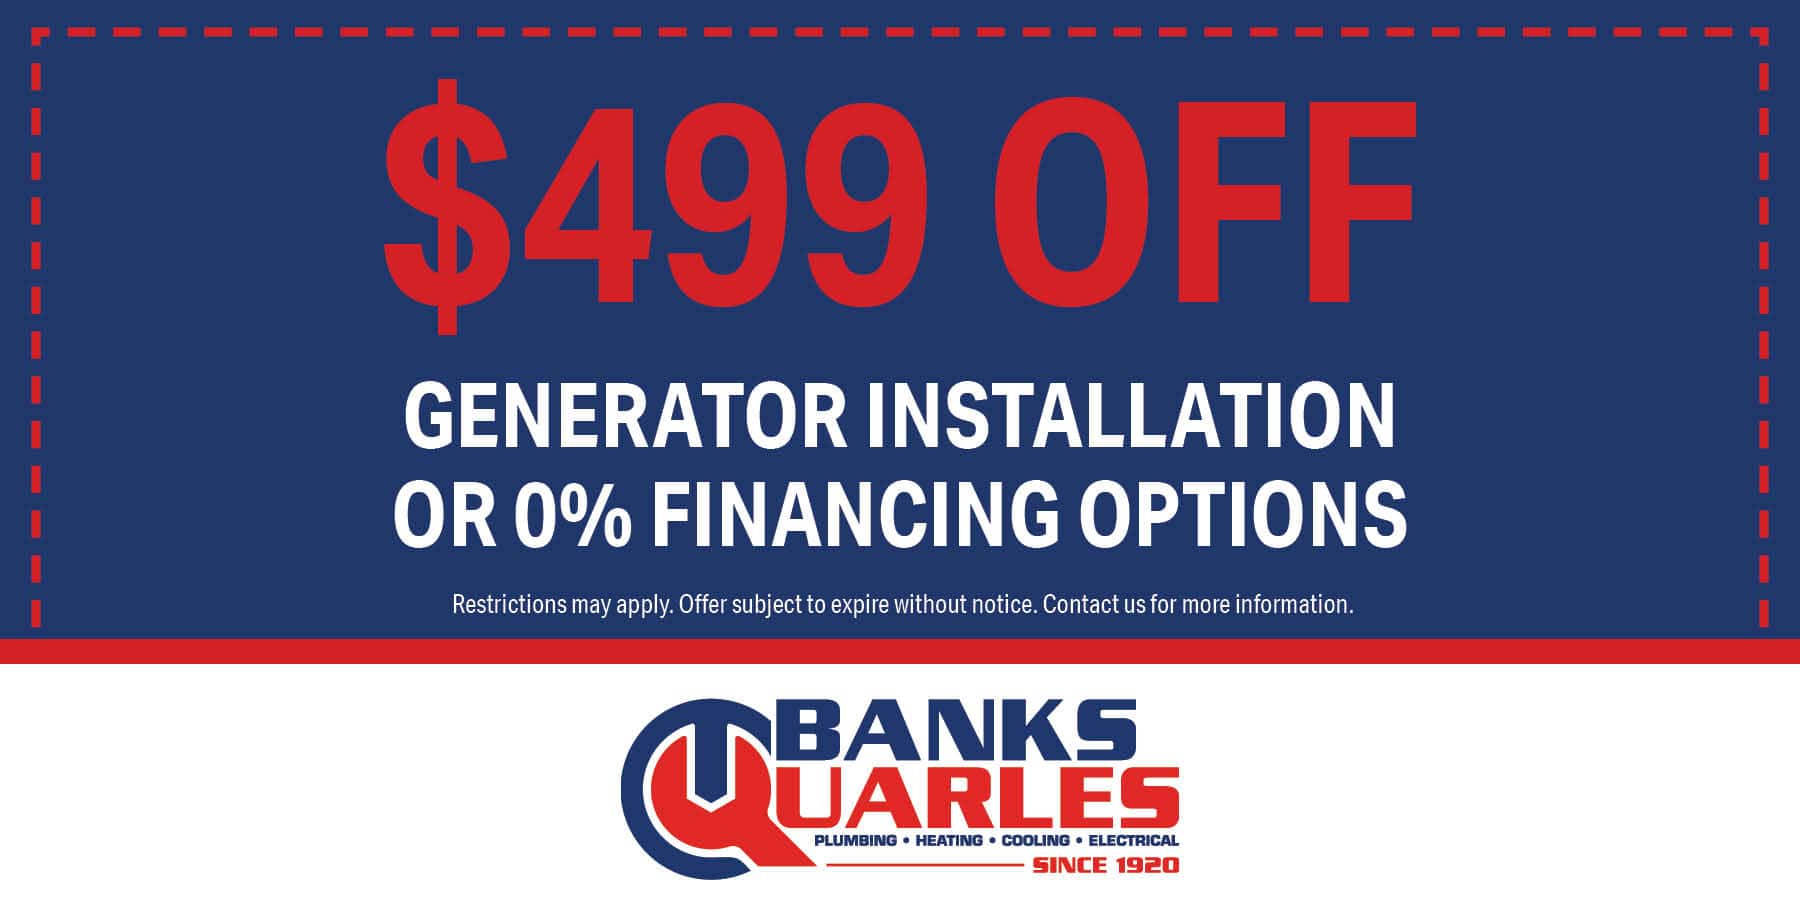 $499 off generator installation or 0% financing options. Offer subject to expire without warning. Contact us for details.